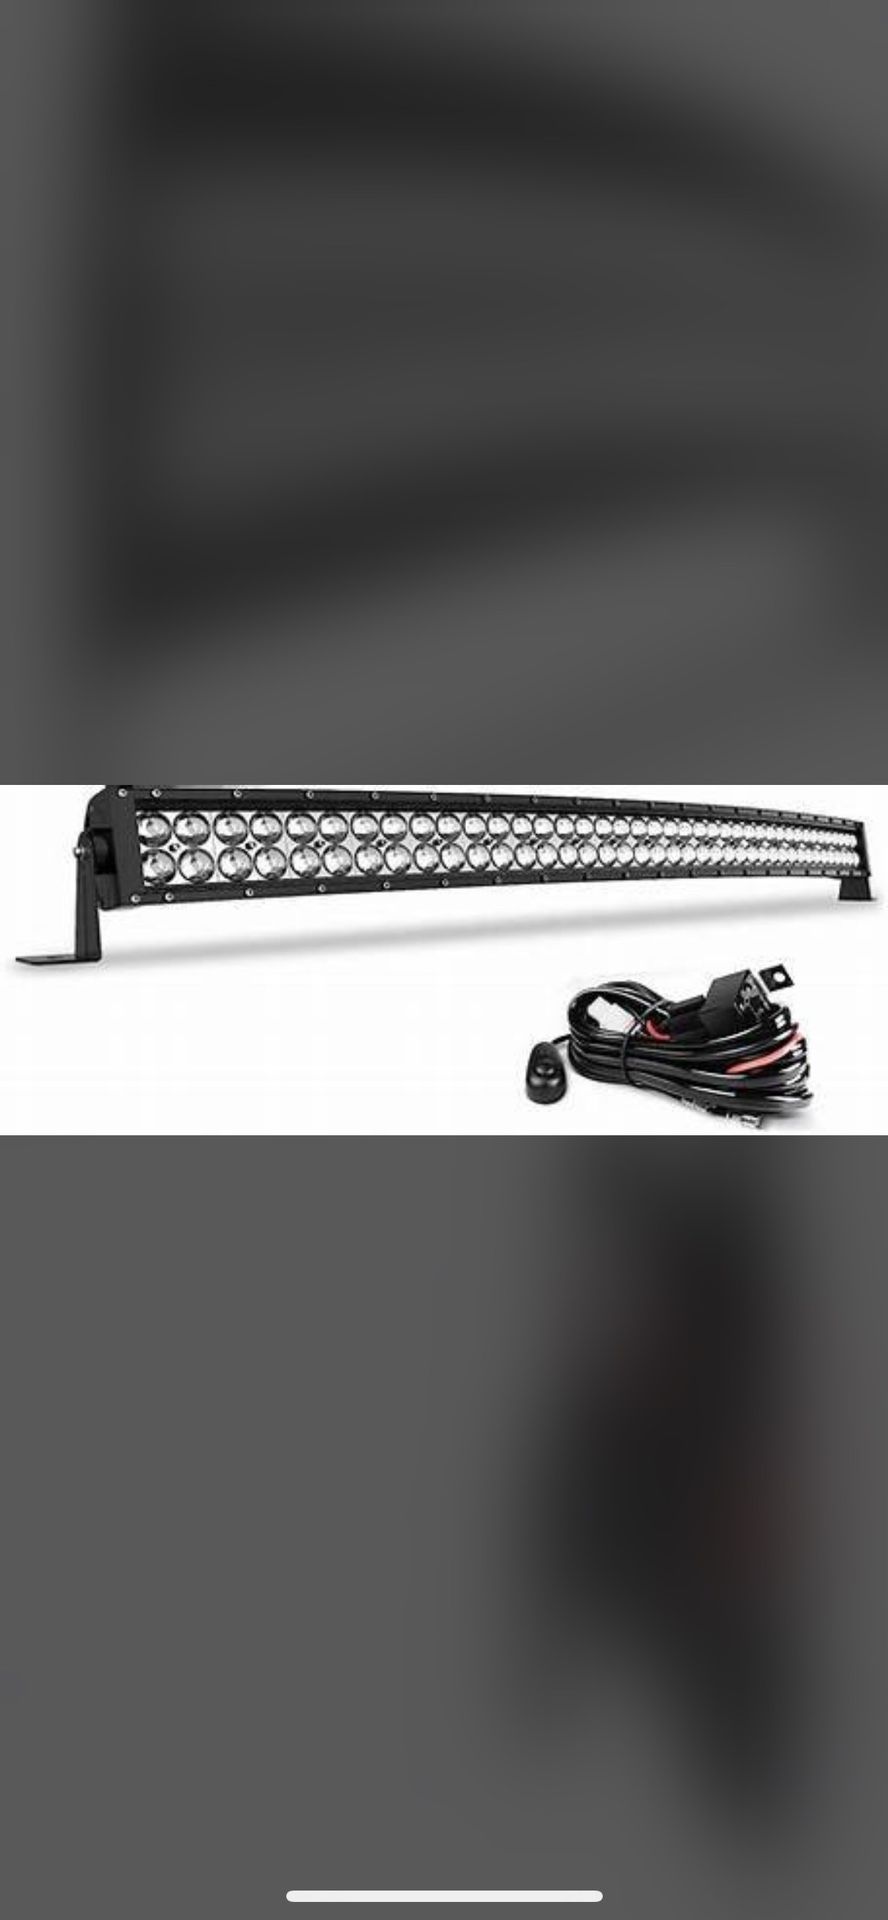 42inch 240w Curved Led Light Bar Flood Spot Combo Off Road Truck 4wd For Jeep